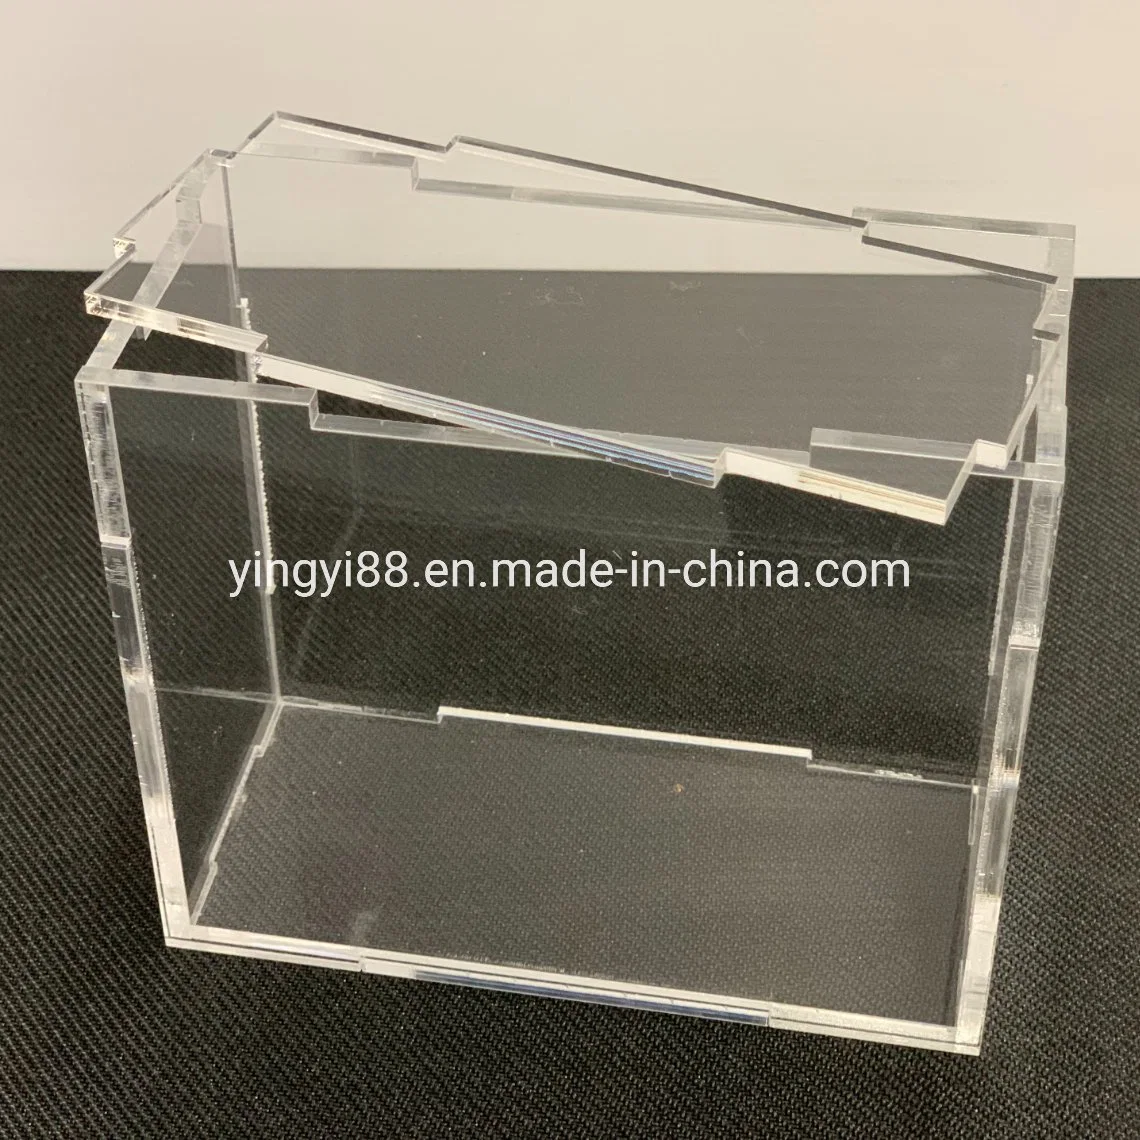 OEM Transparent Acrylic Booster Box with Lid